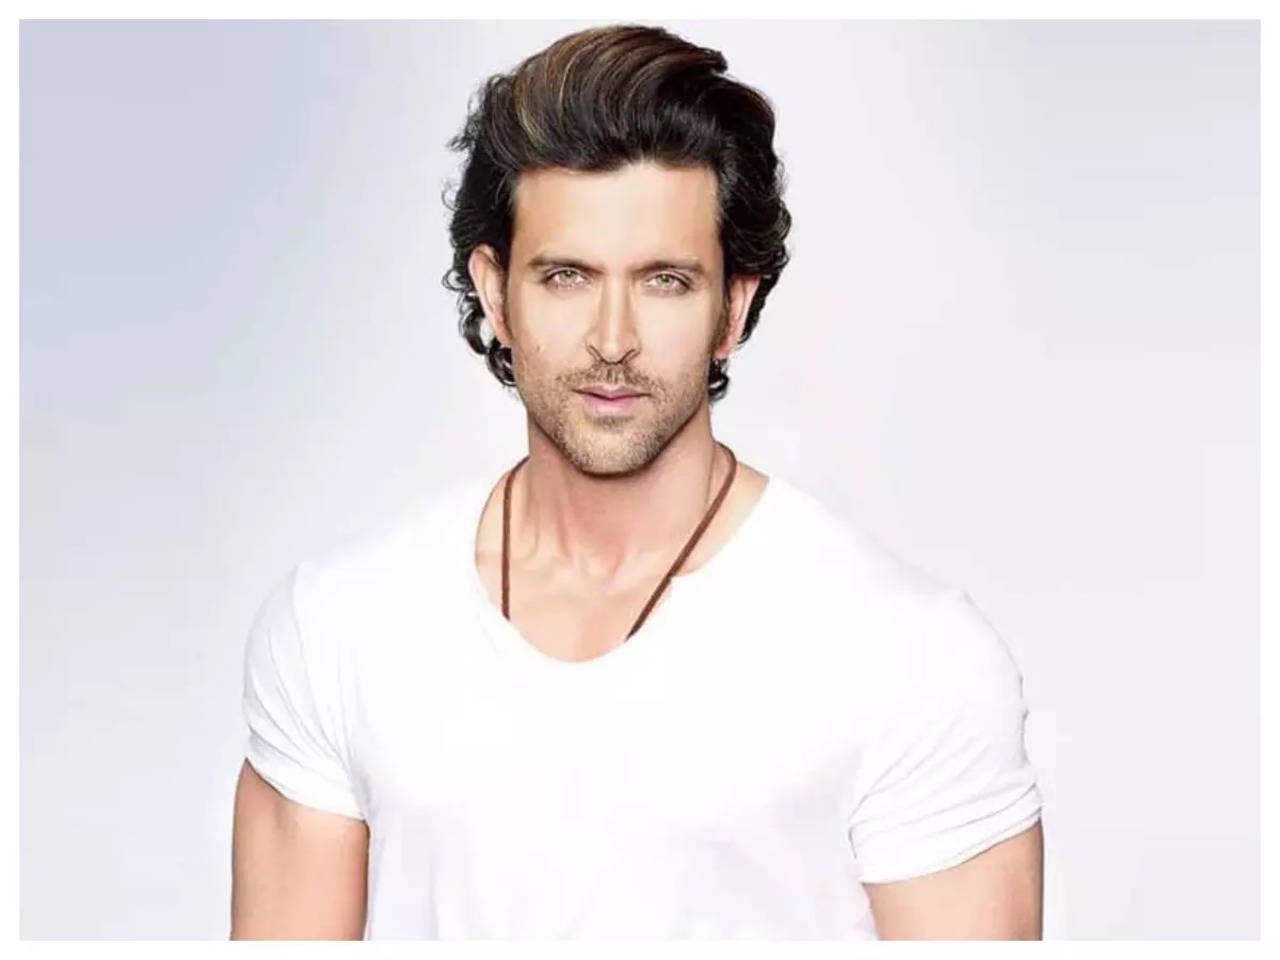 Top 999 Hrithik Roshan Images Amazing Collection Hrithik Roshan Images Full 4k